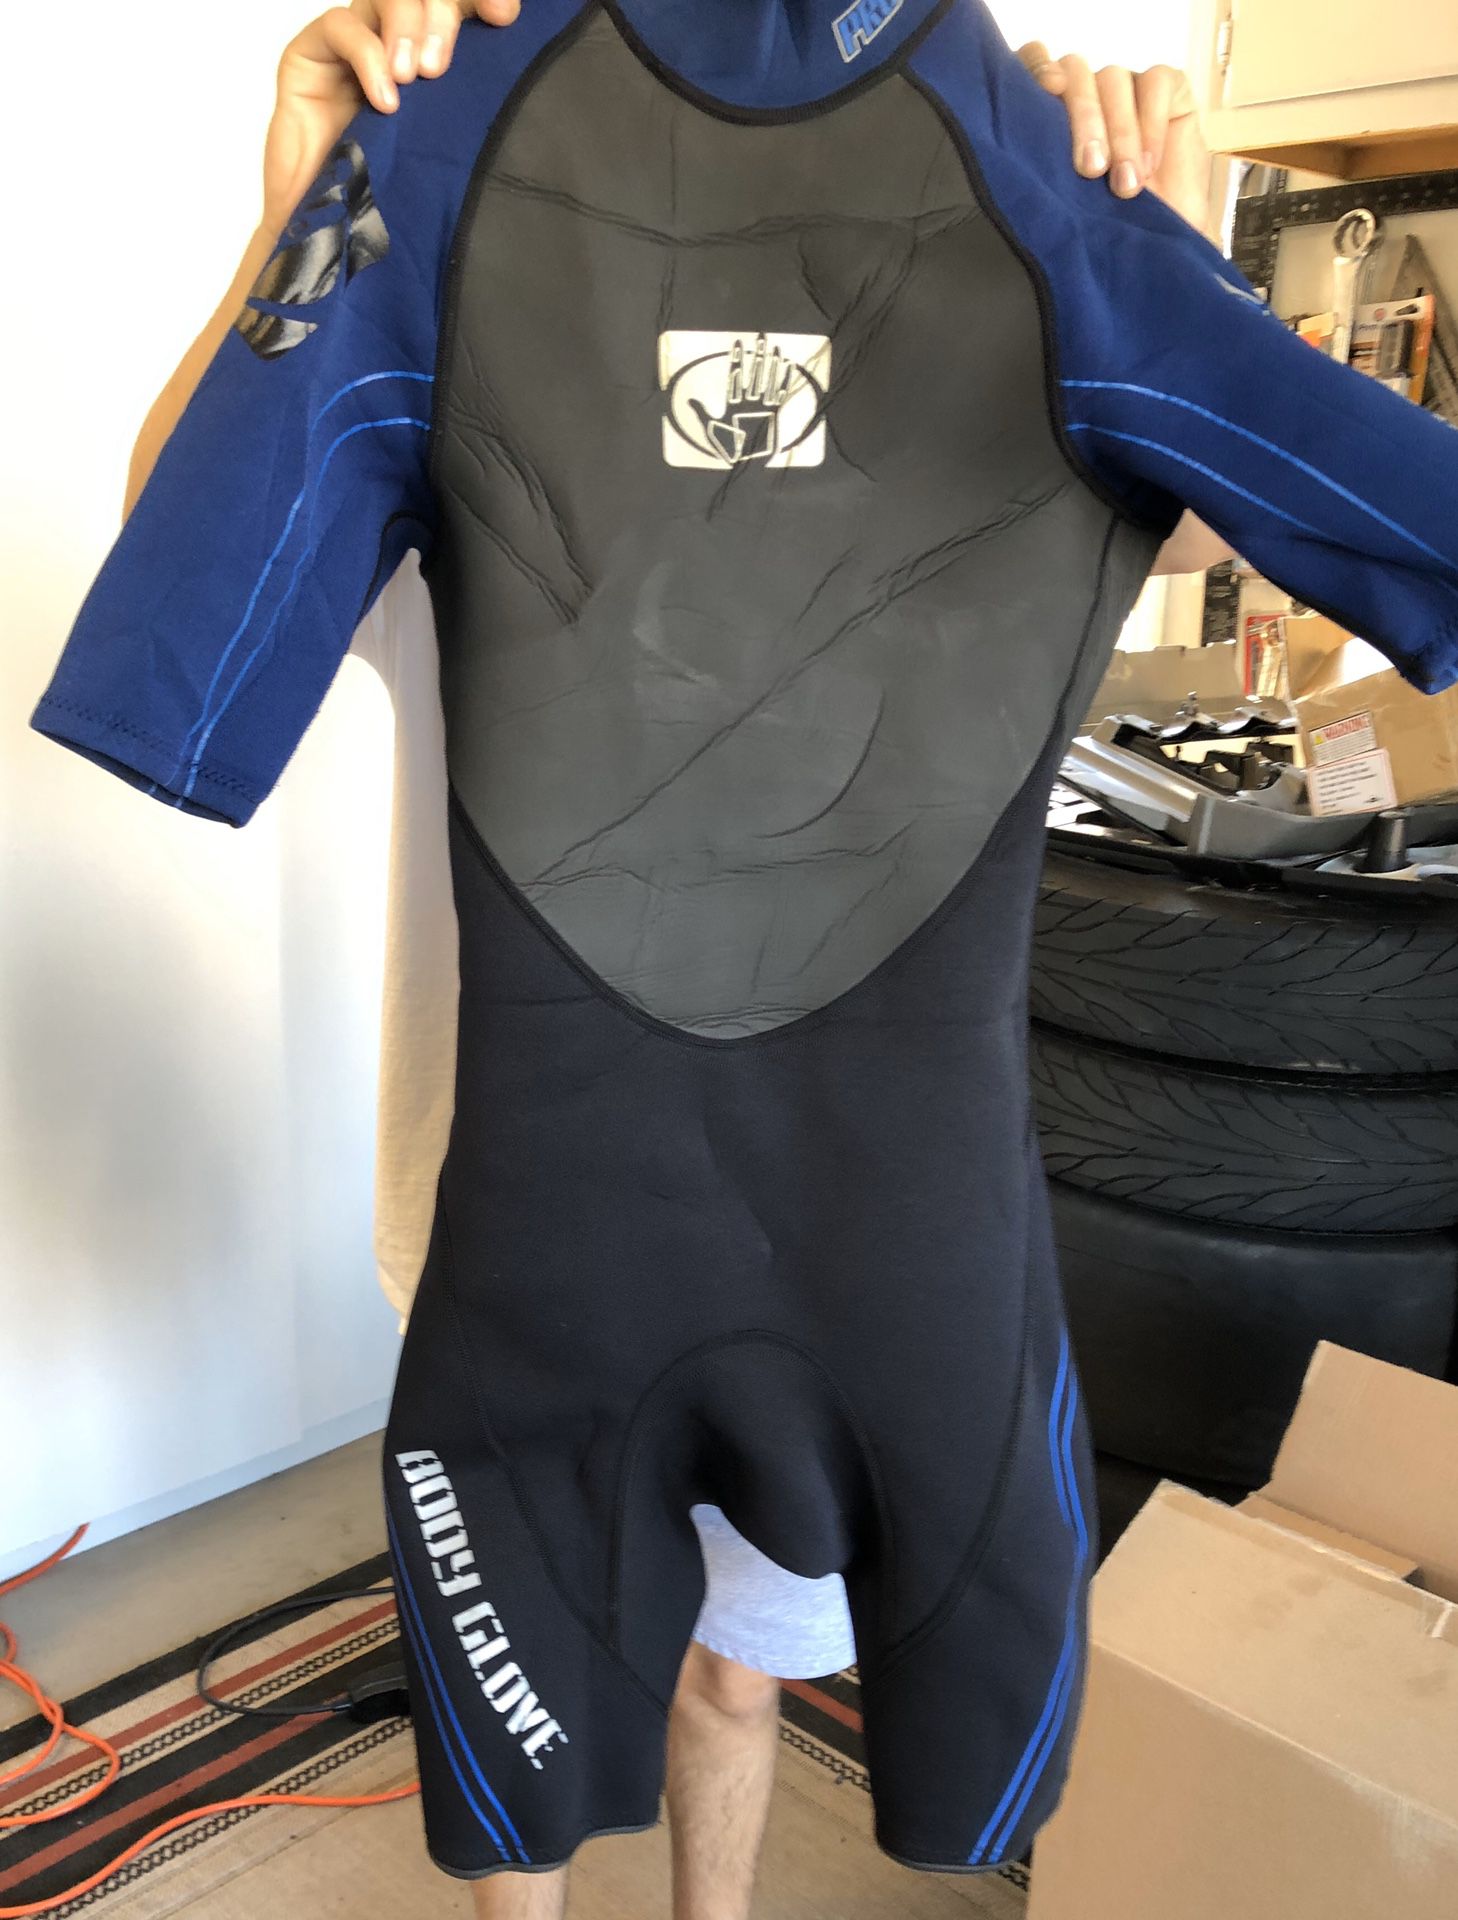 Body glove wetsuit men’s size small